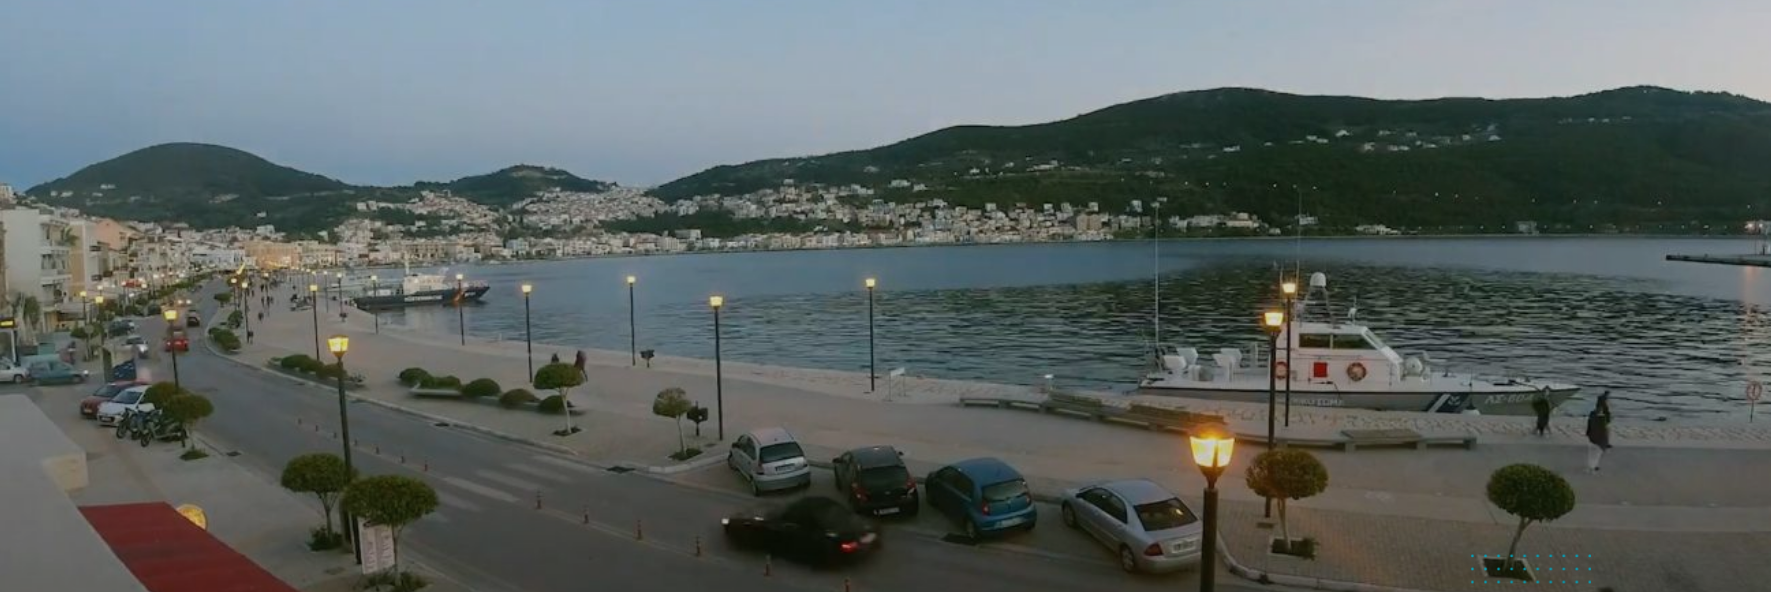 Municipality of Eastern Samos - Energy autonomy in the port of the city of Samos